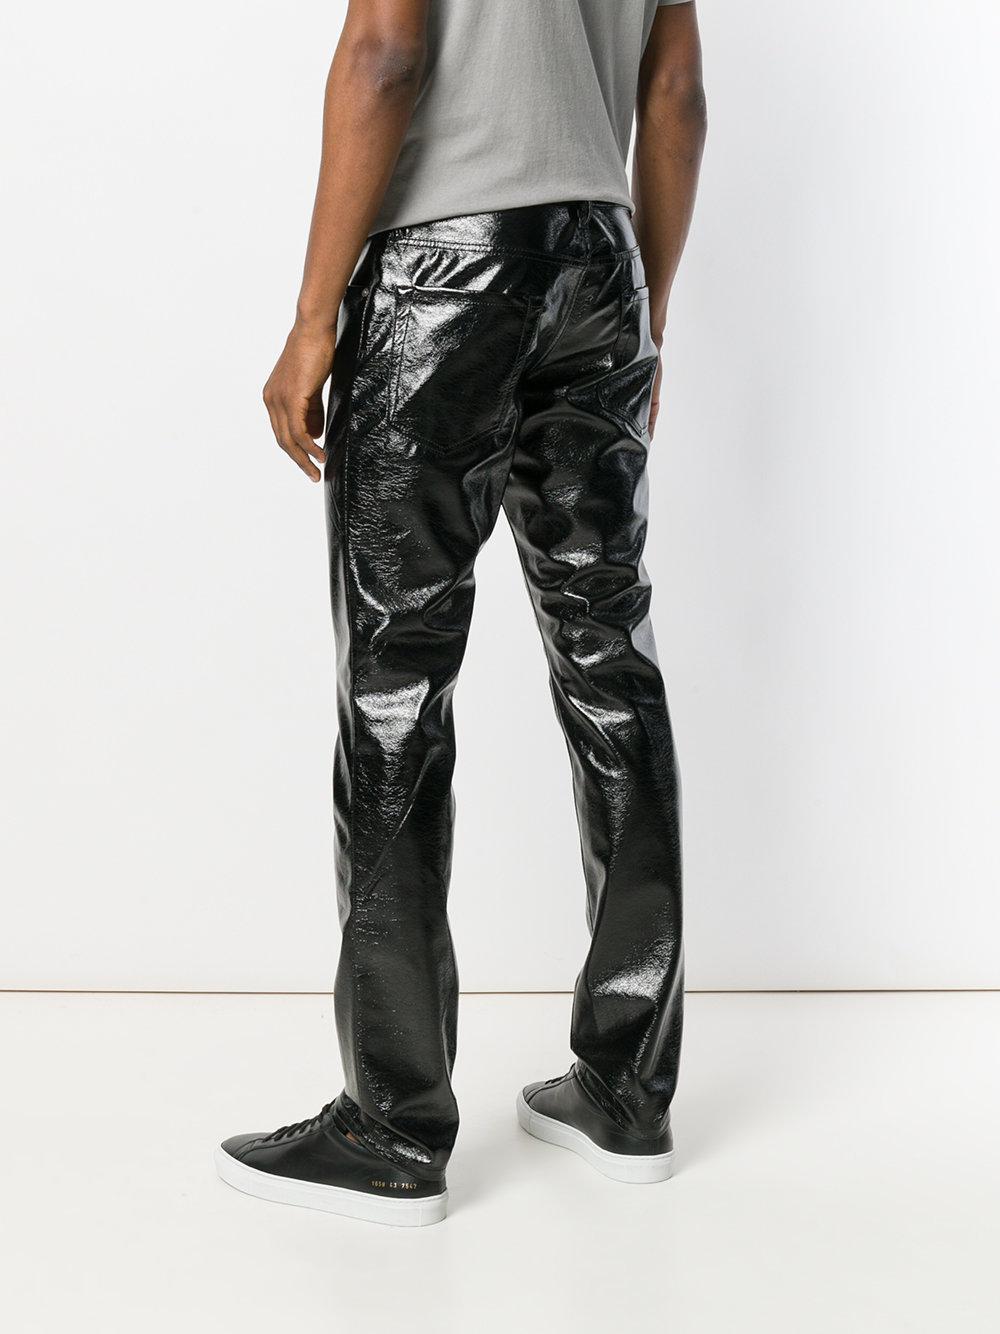 Lyst - Just Cavalli Patent Leather Trousers in Black for Men